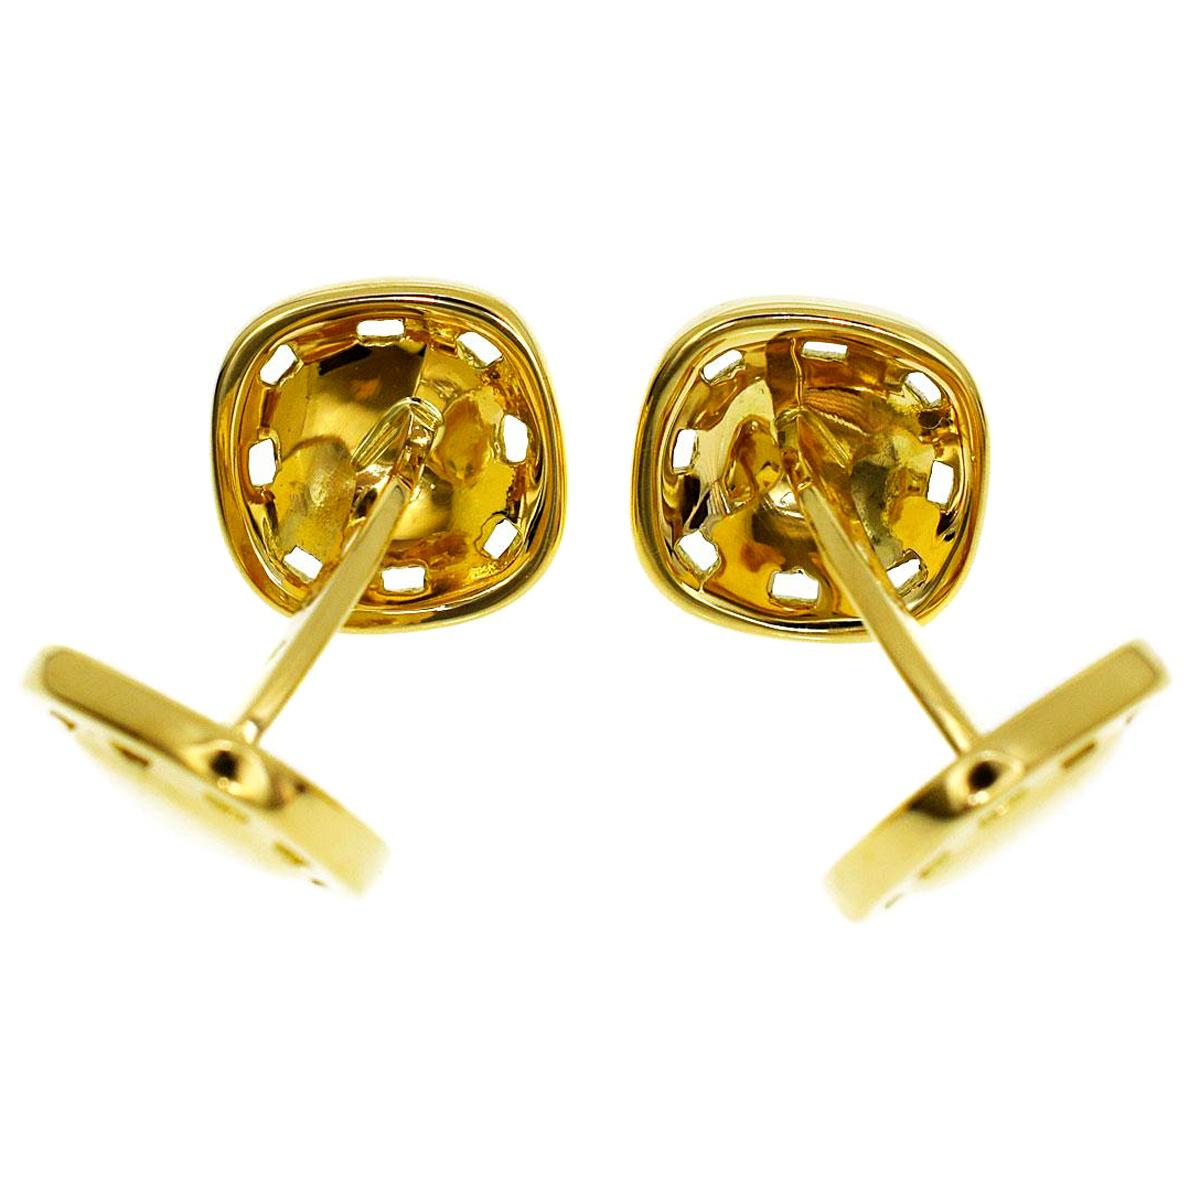 A chic pair of vintage Hermes cuff links featuring a high polished 18k yellow gold finish.